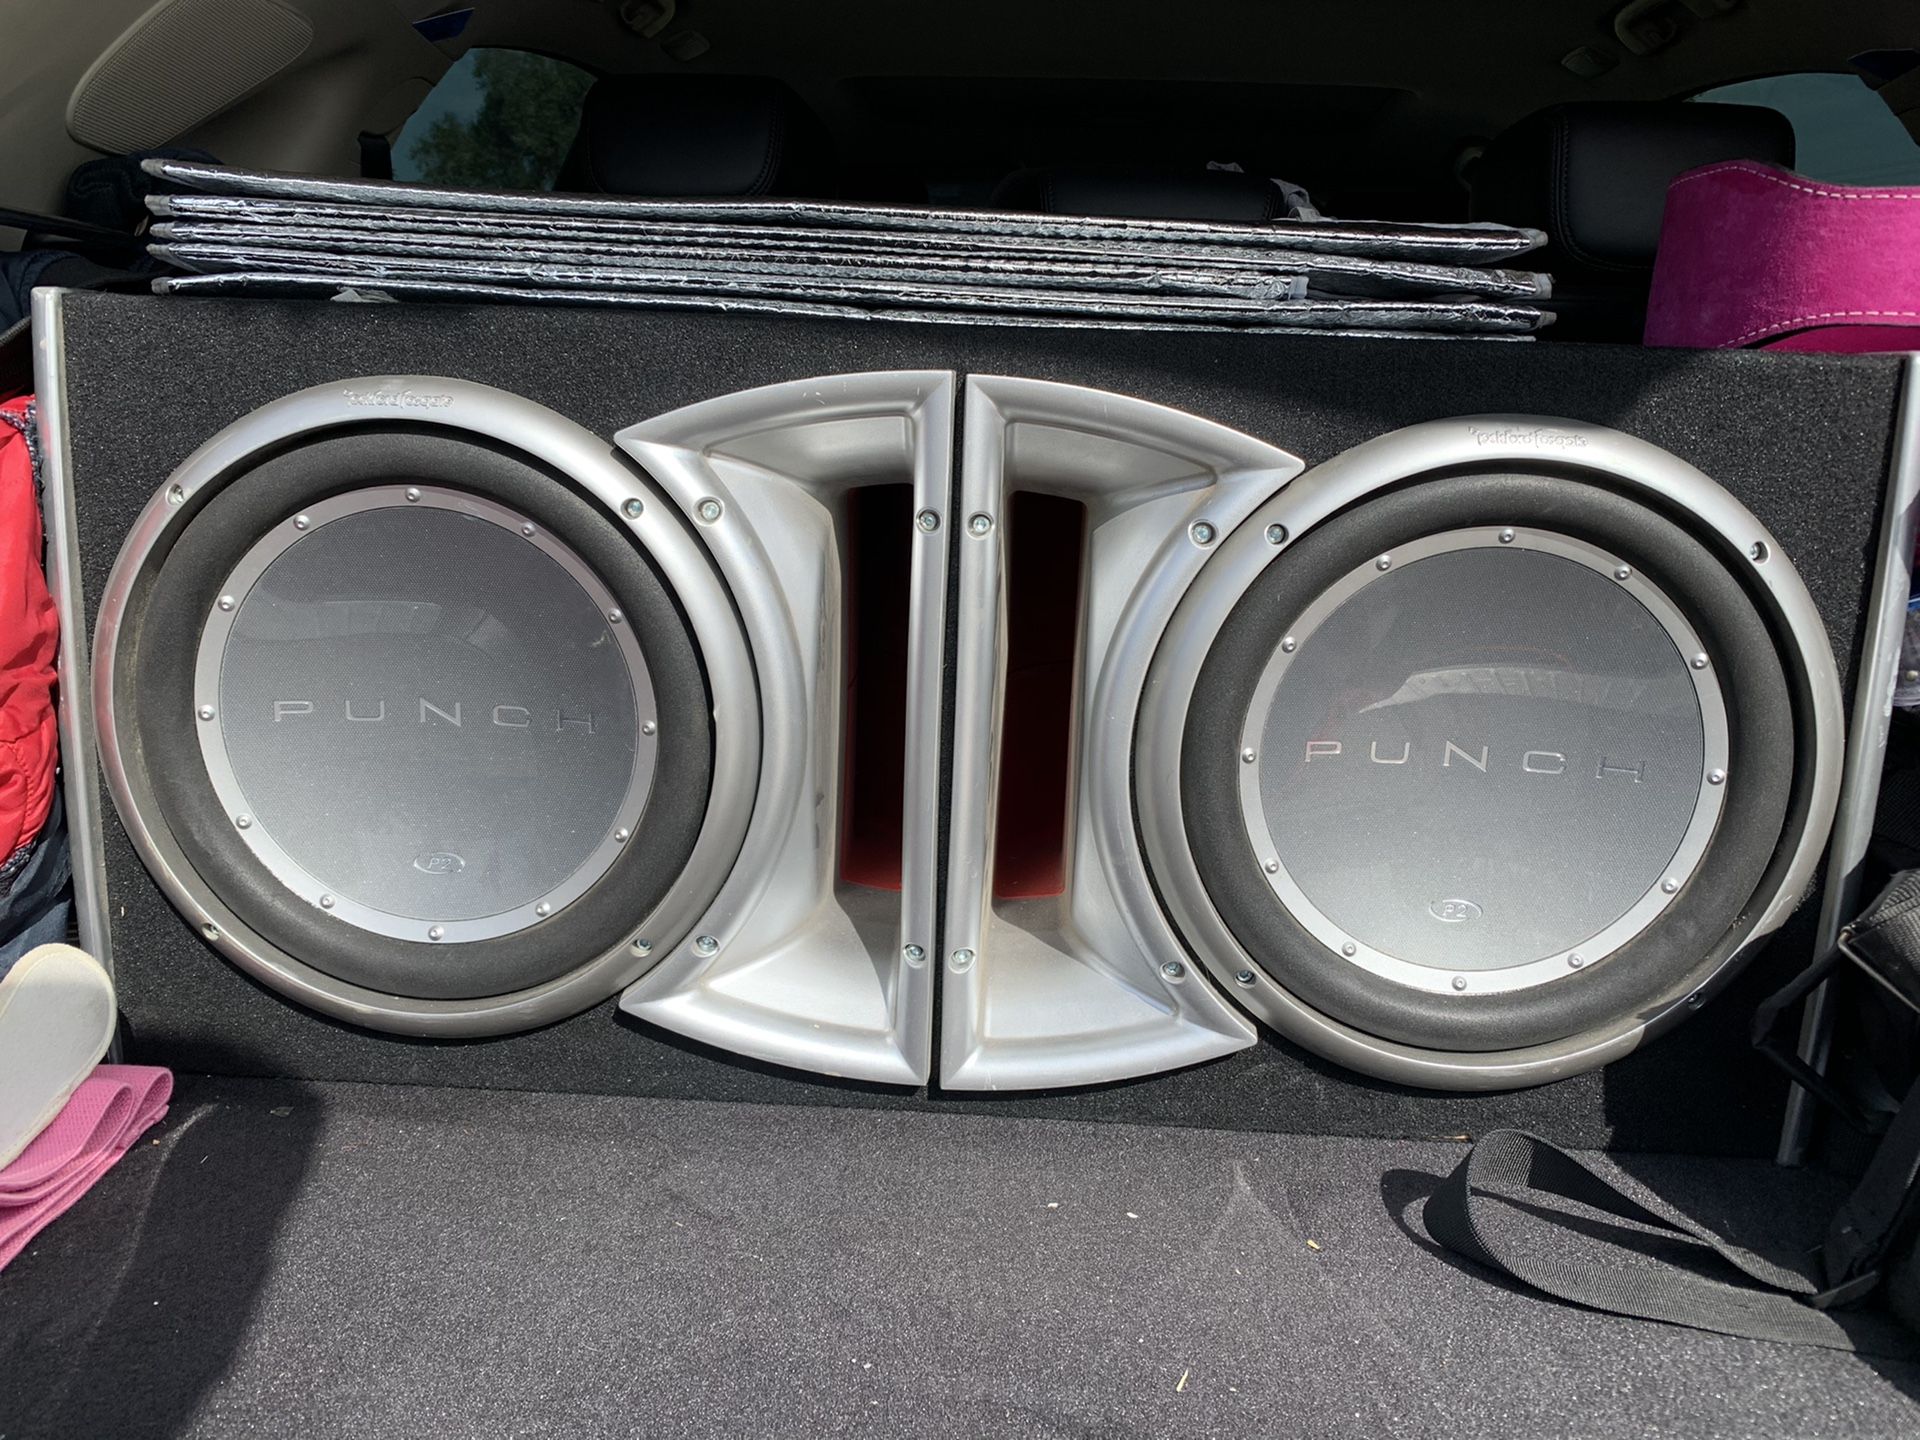 rockford fosgate punch 12” inch subwoofers with enclosed box